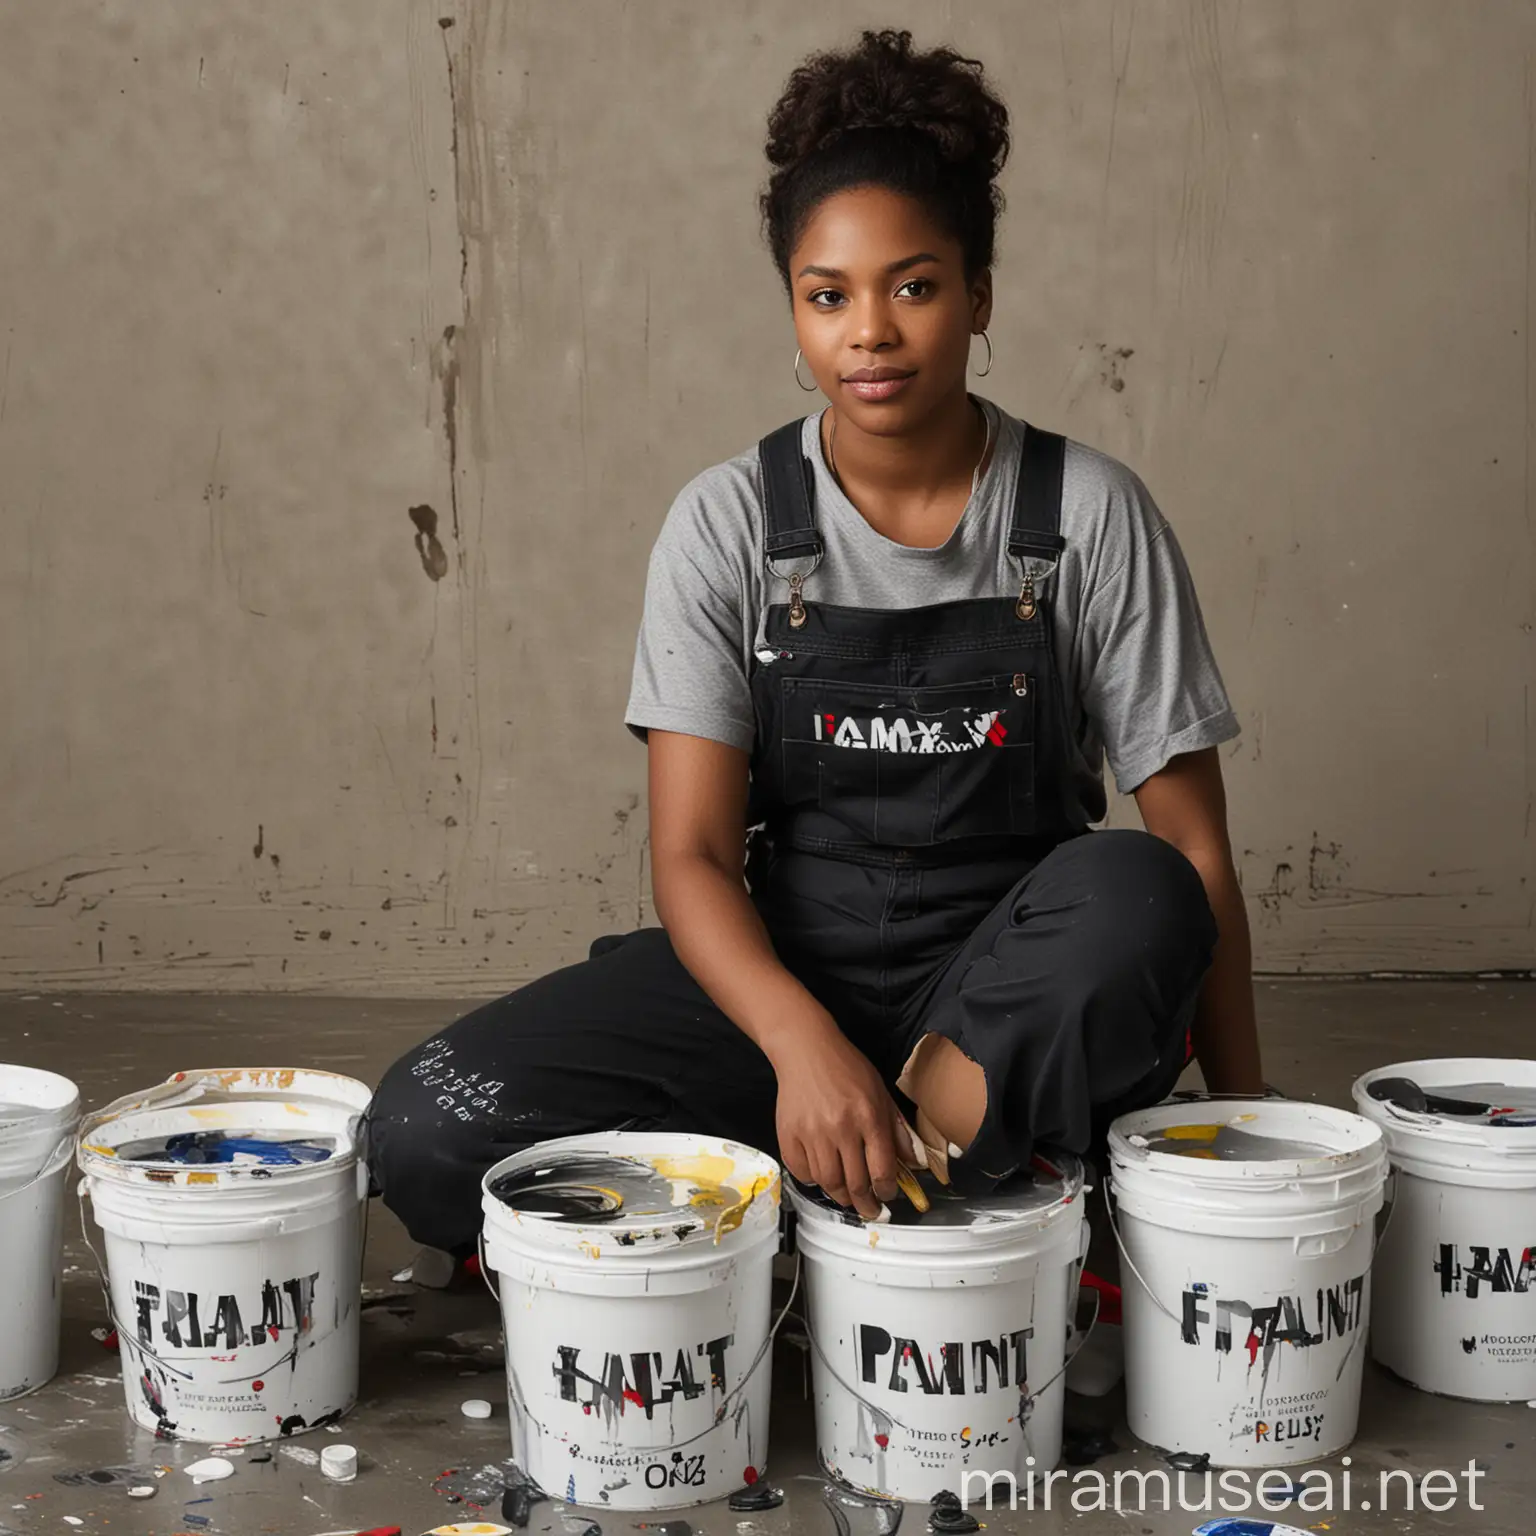 A black woman wearing an overall with I-MAX PAINT written on it, producing paint, and some paint buckets around her, I-MAX PAINT written on the buckets